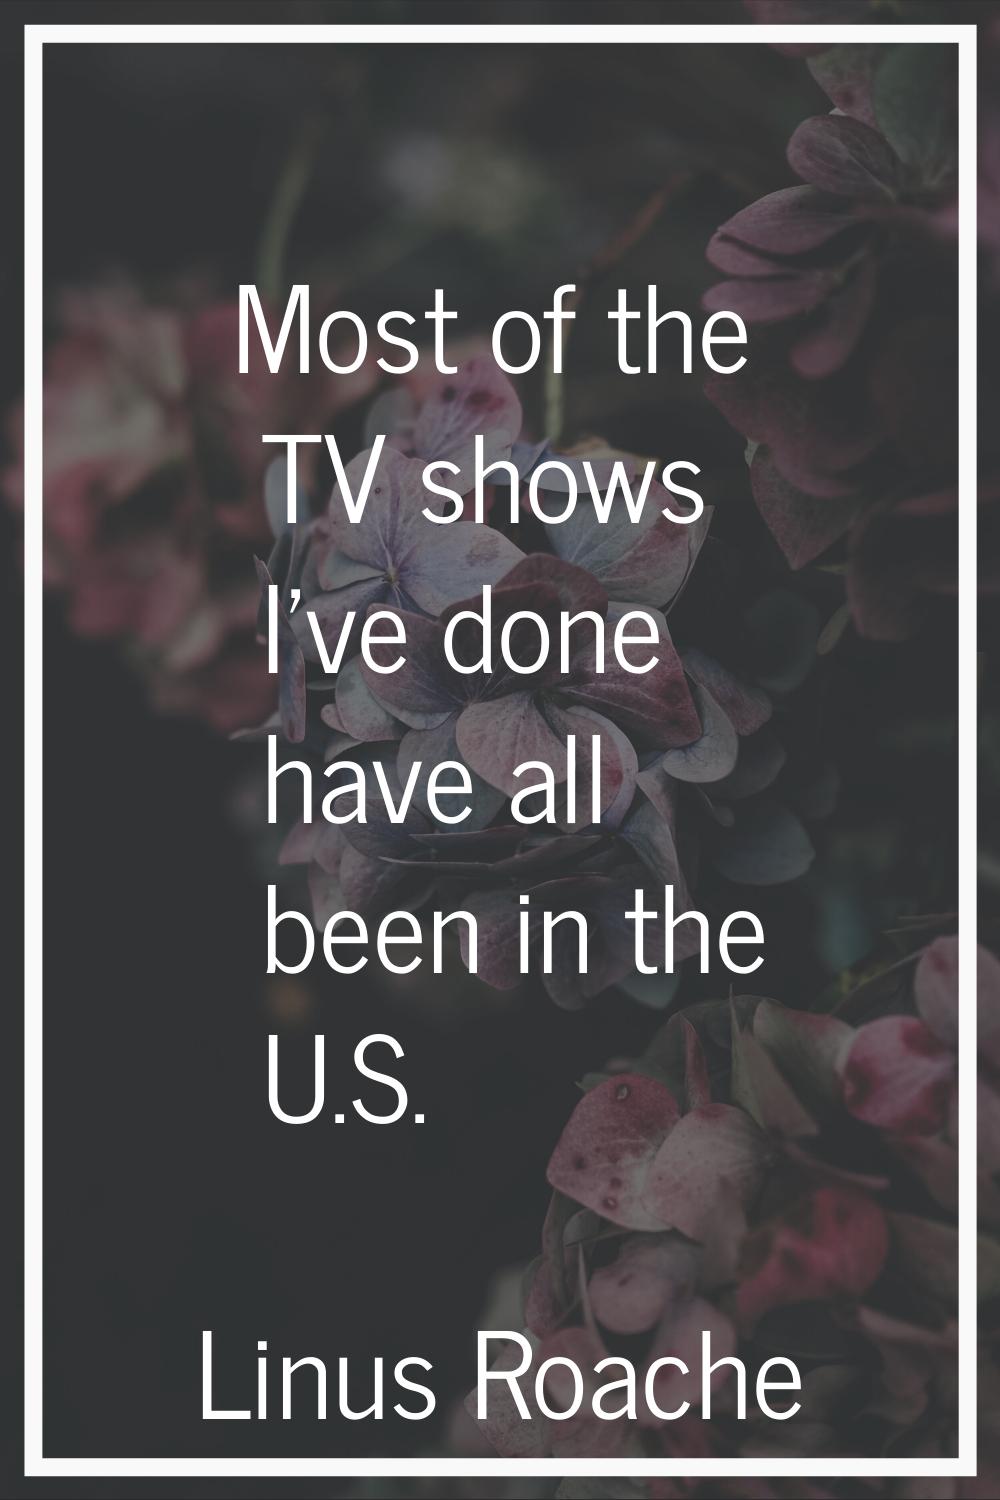 Most of the TV shows I've done have all been in the U.S.